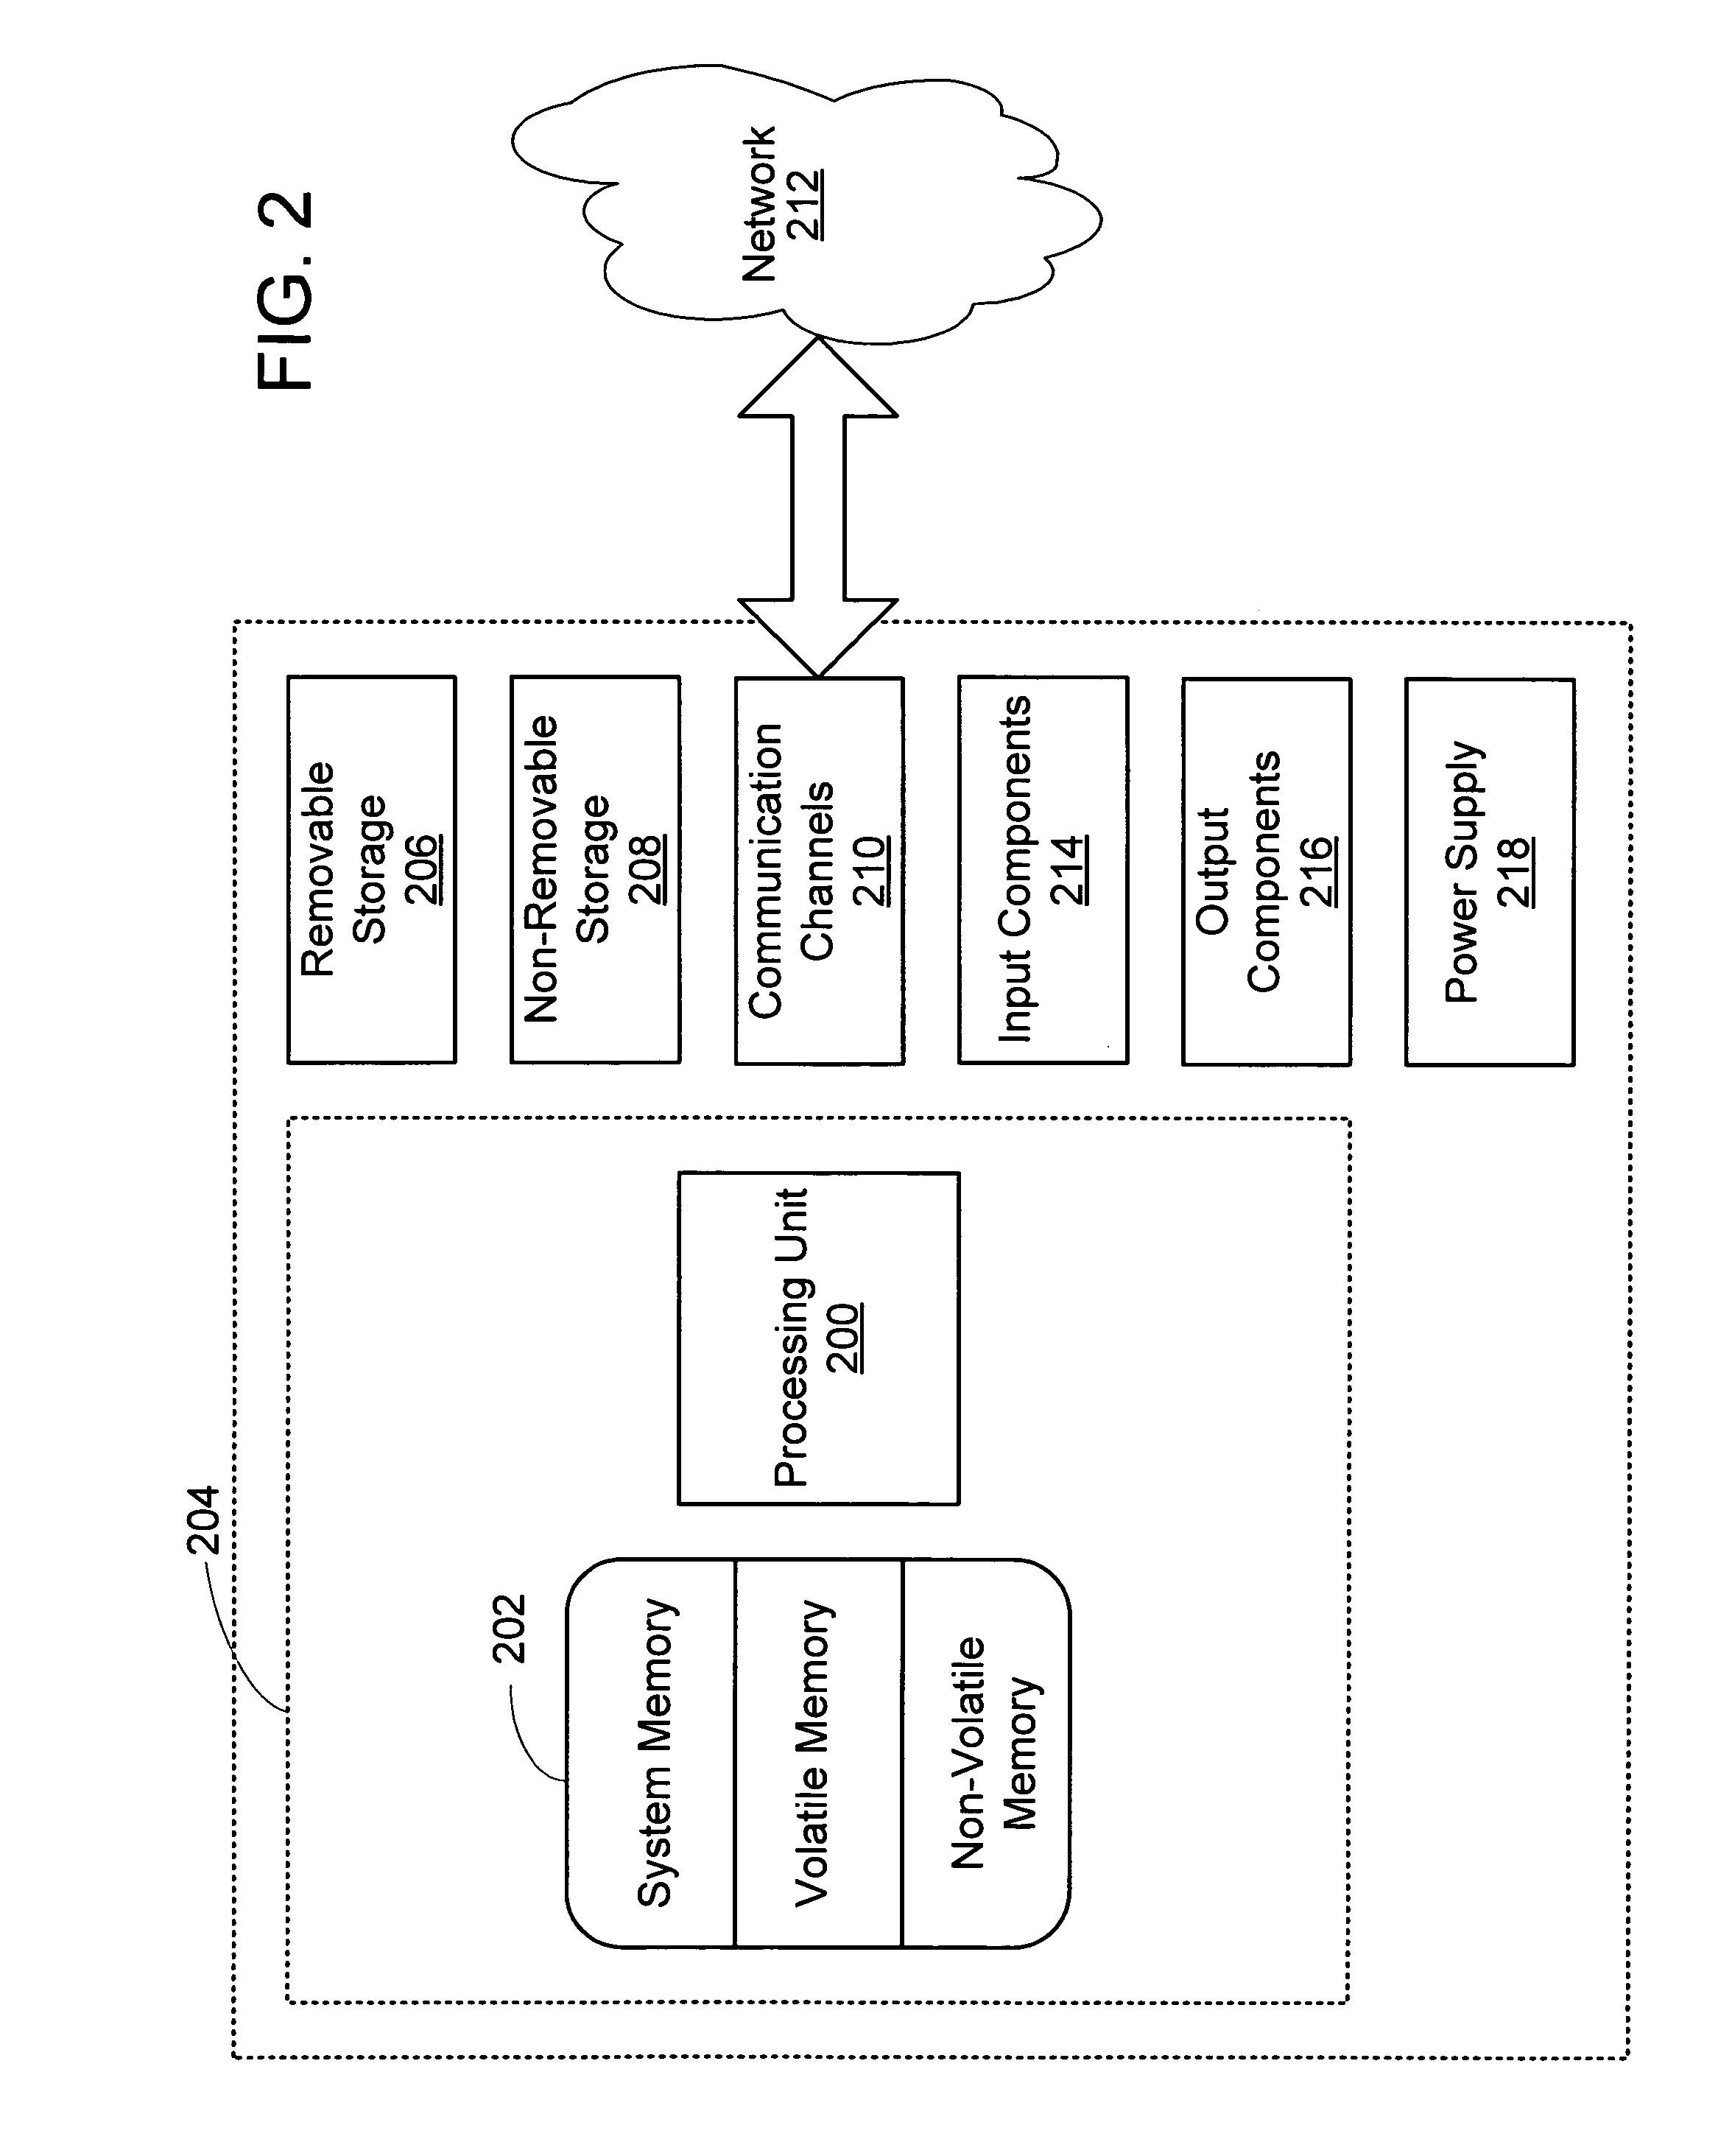 Method and system for structured programmed input/output transactions